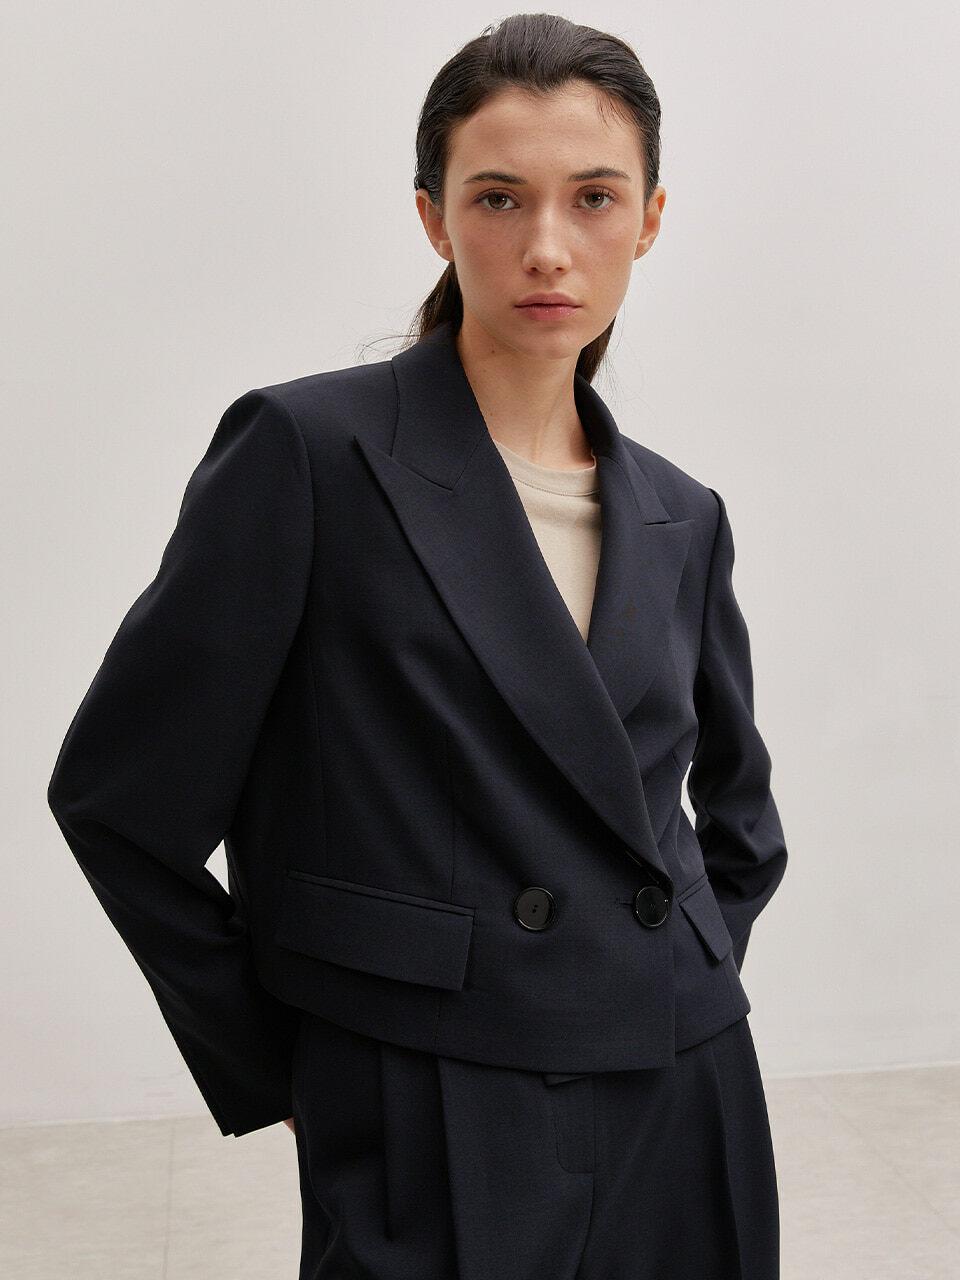 COLLABOTORY Tailored Double-breasted Crop Jacket in Black | Lyst UK